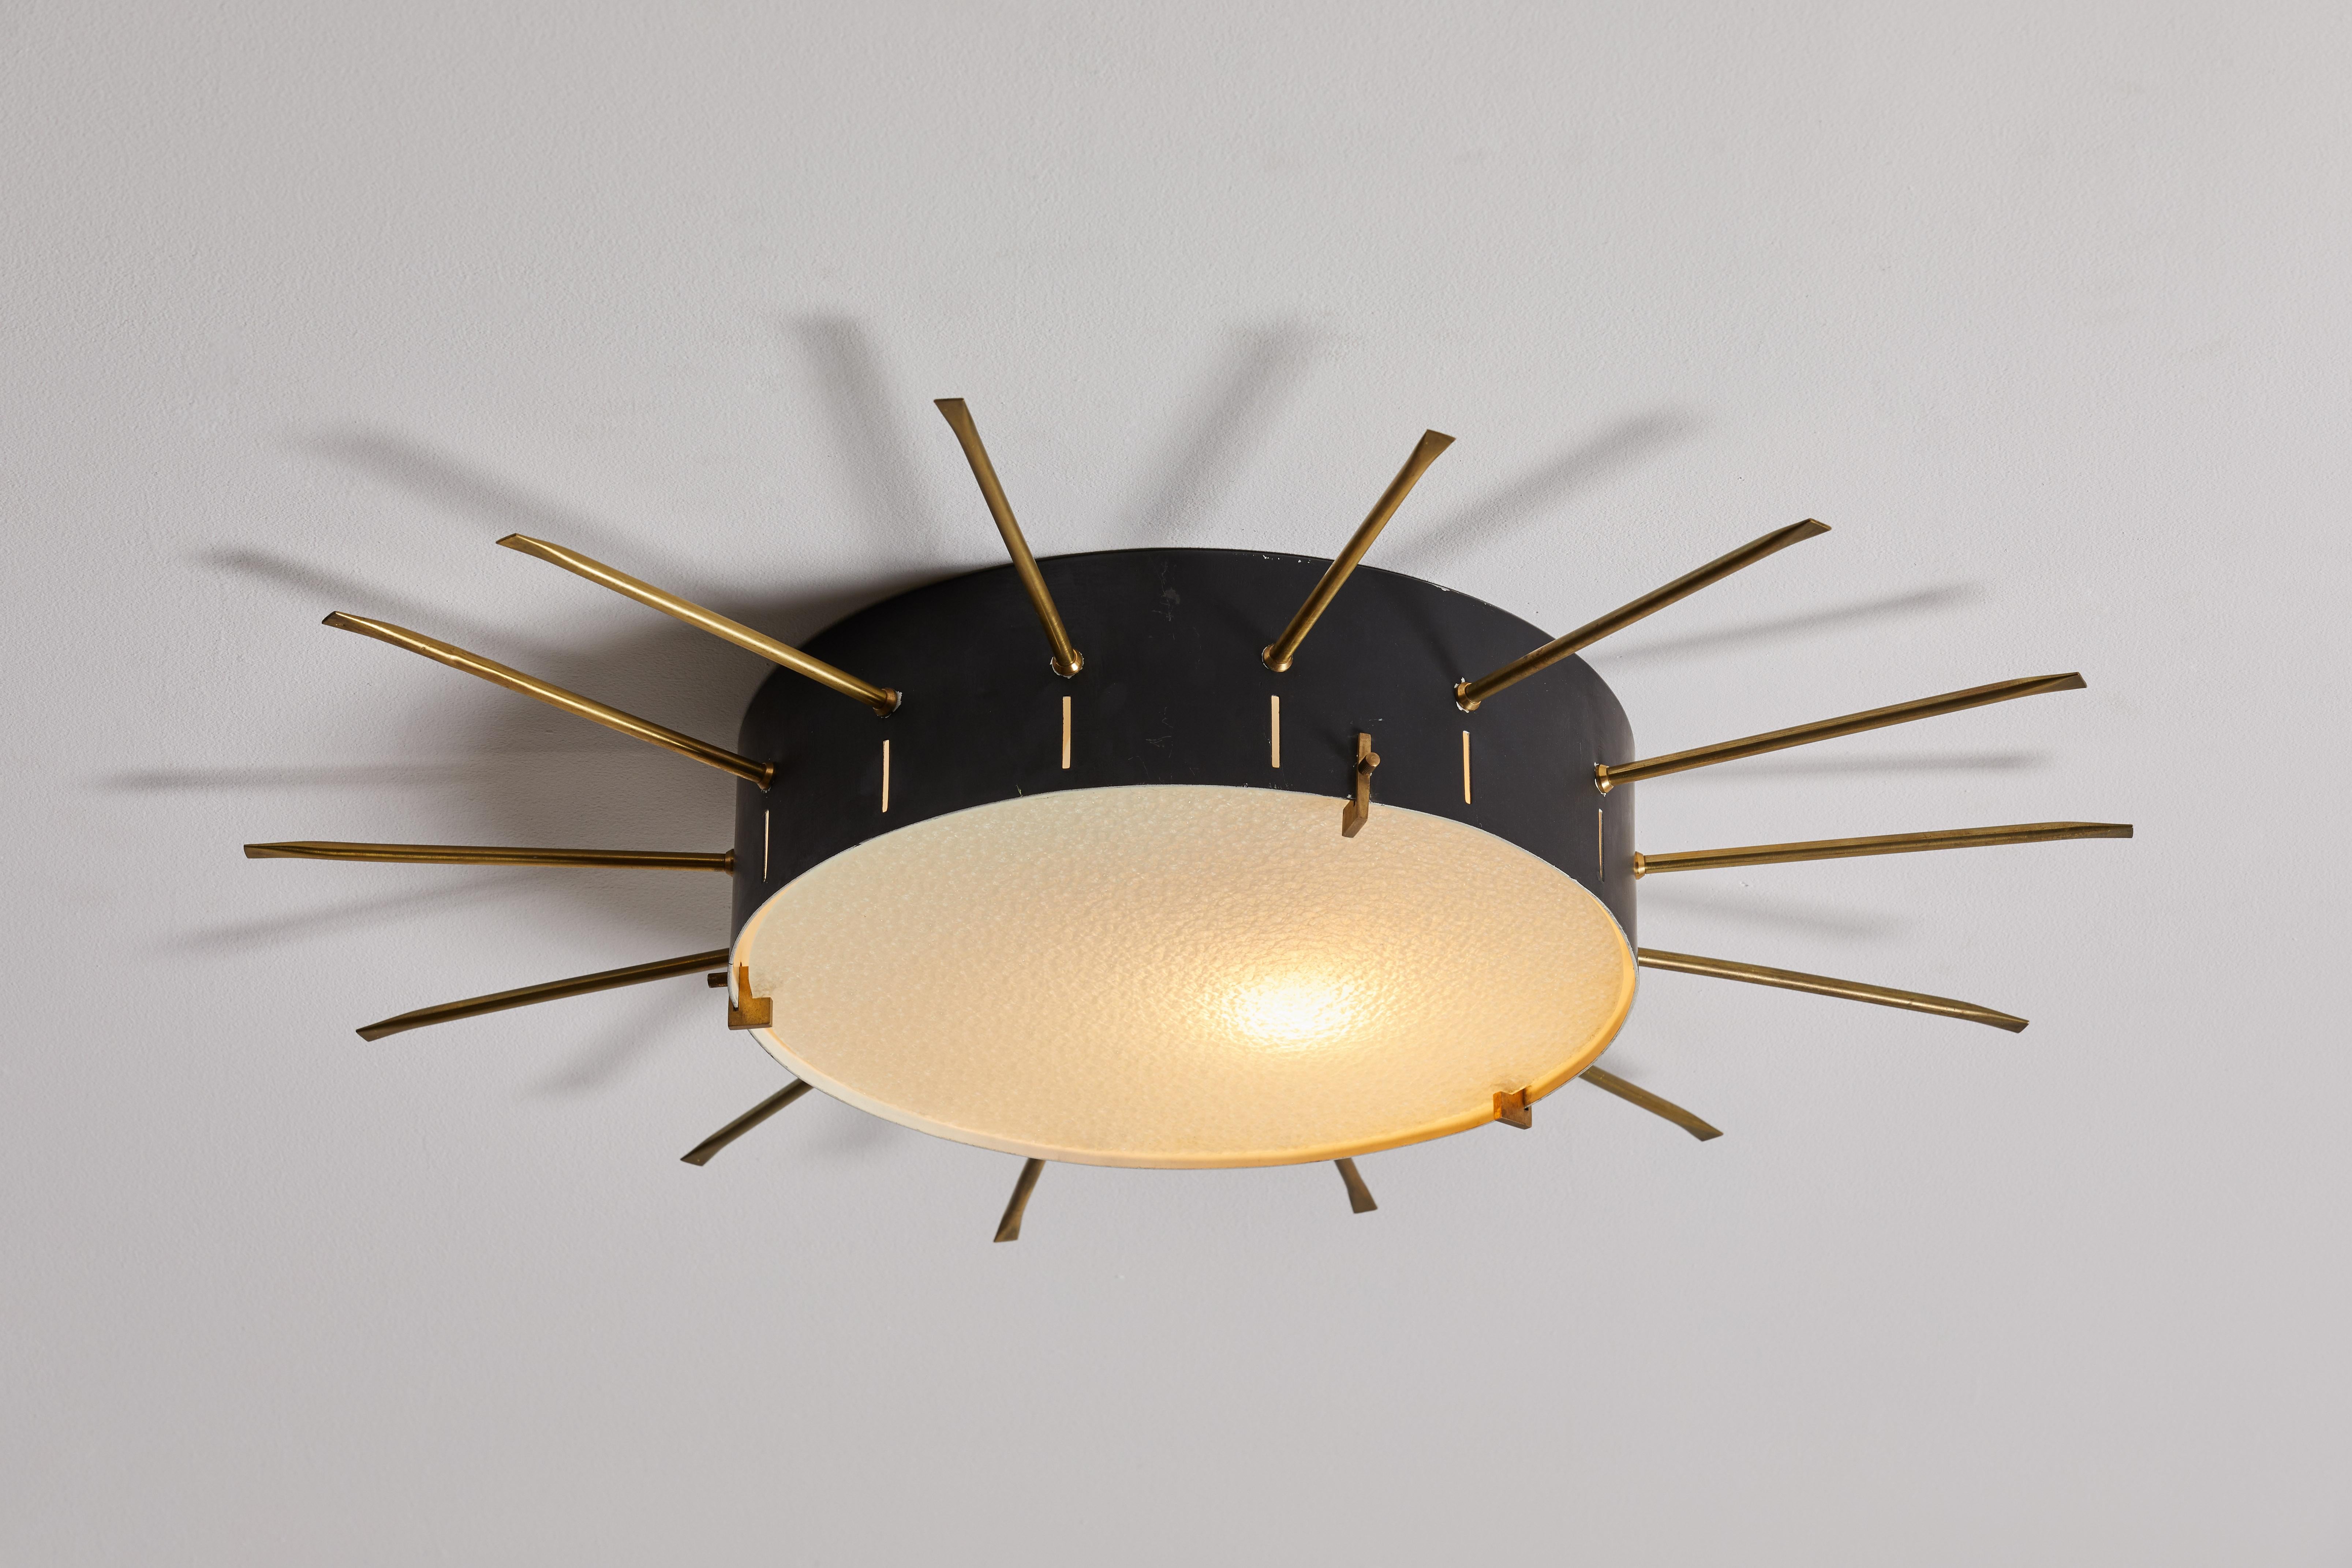 Single flush mount ceiling lights by G.C.M.E. manufactured in Italy, 1955. Enameled aluminum, textured glass diffusers, brass. Rewired for U.S. junction boxes. Each light takes two E27 60w maximum bulbs. Bulbs provided as a one time courtesy. Priced